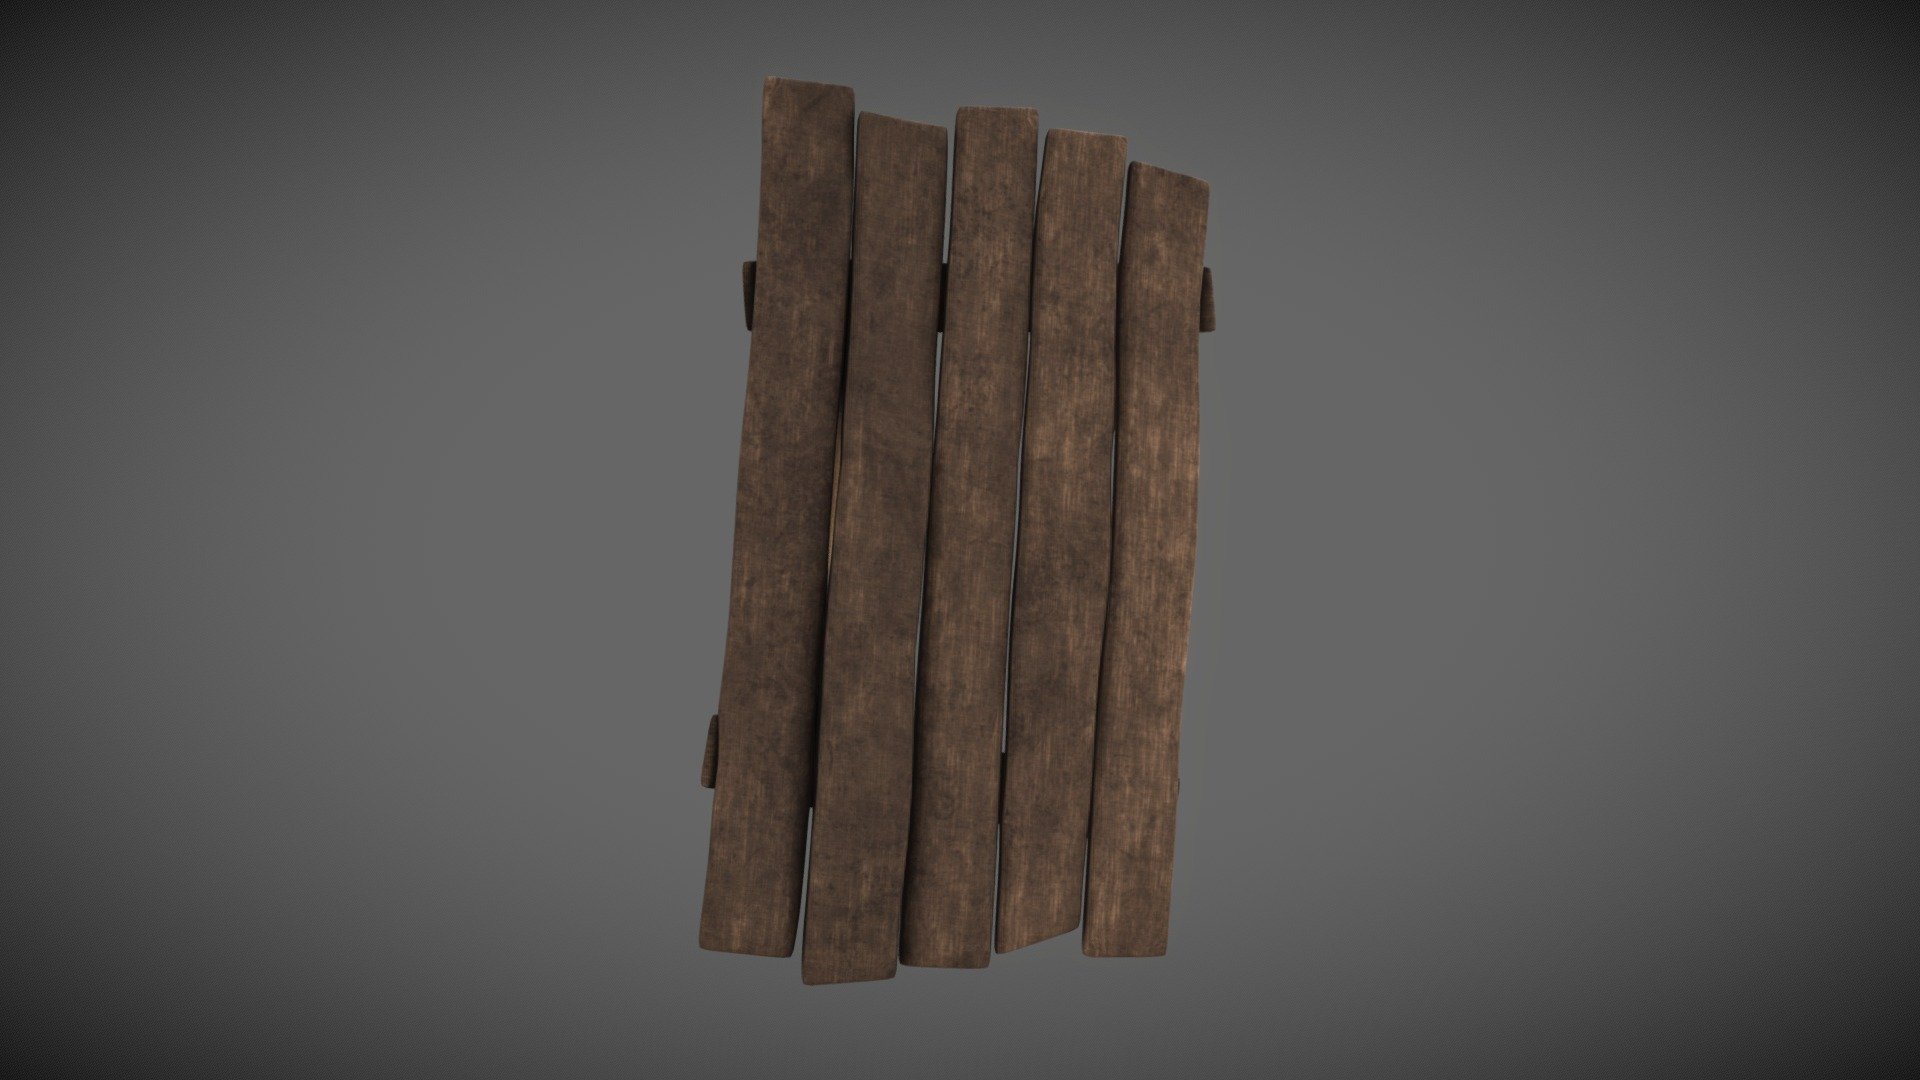 A rather primitive/makeshift wooden shield designed for a survival type game.
It was created in Blender and textured in Substance Painter with 2k resolution for good performance for games 3d model